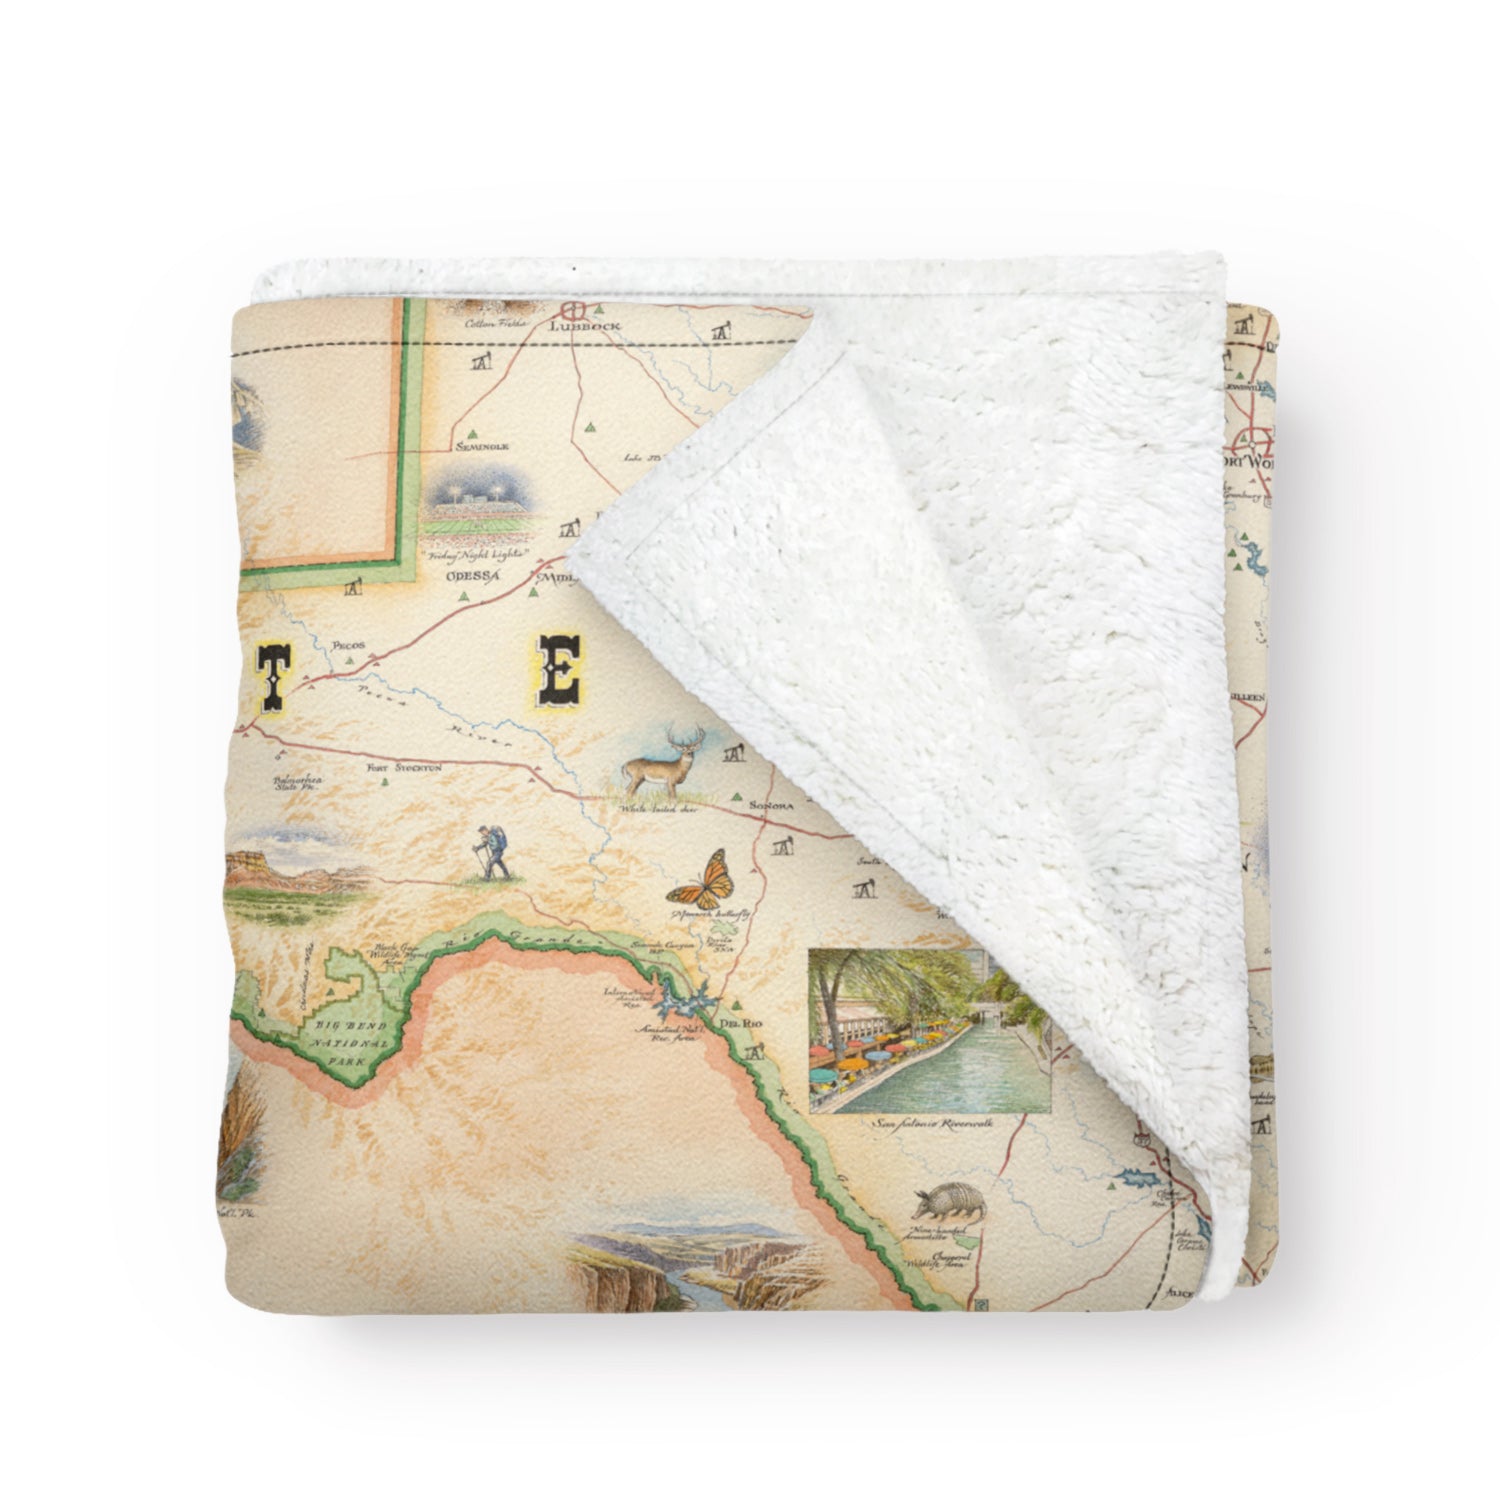 Texas state map on a fleece blanket. Artistic, full-color map. Measures 58